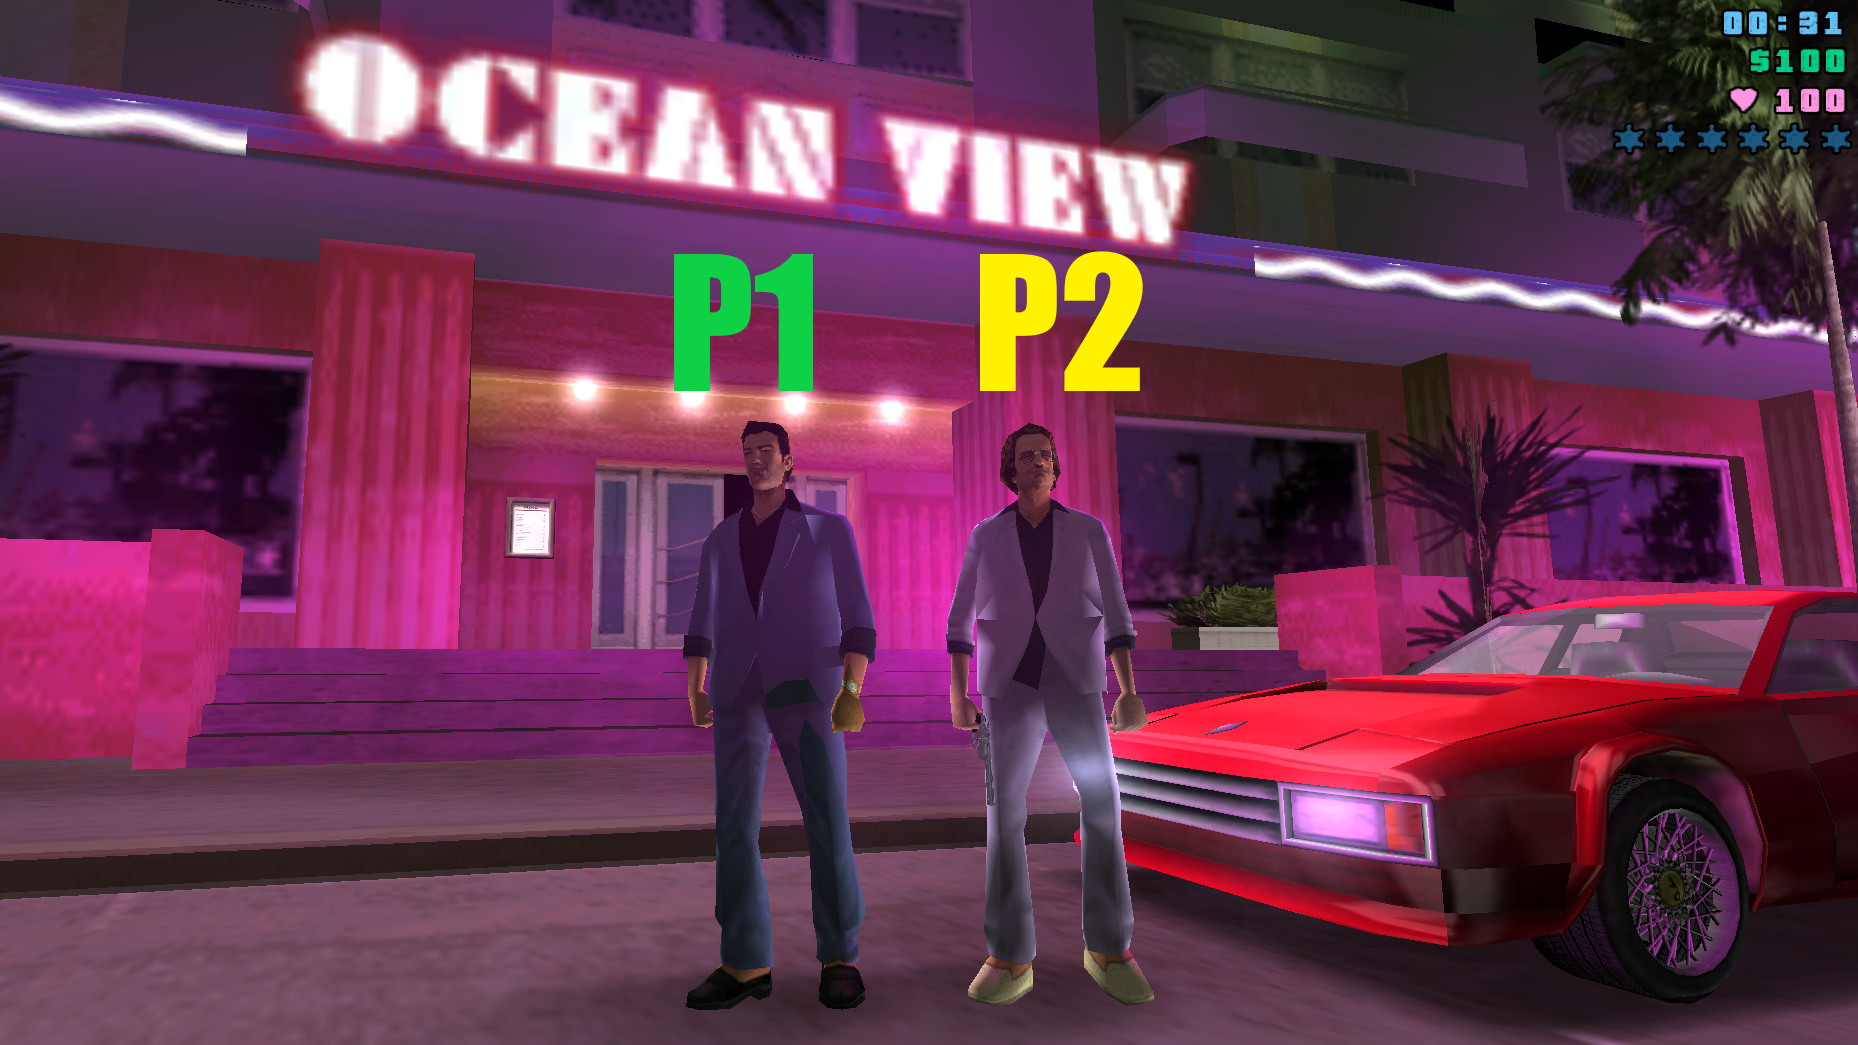 VC 2 Players Mod for Grand Theft Auto: Vice City image Image 1. vc 2 player...